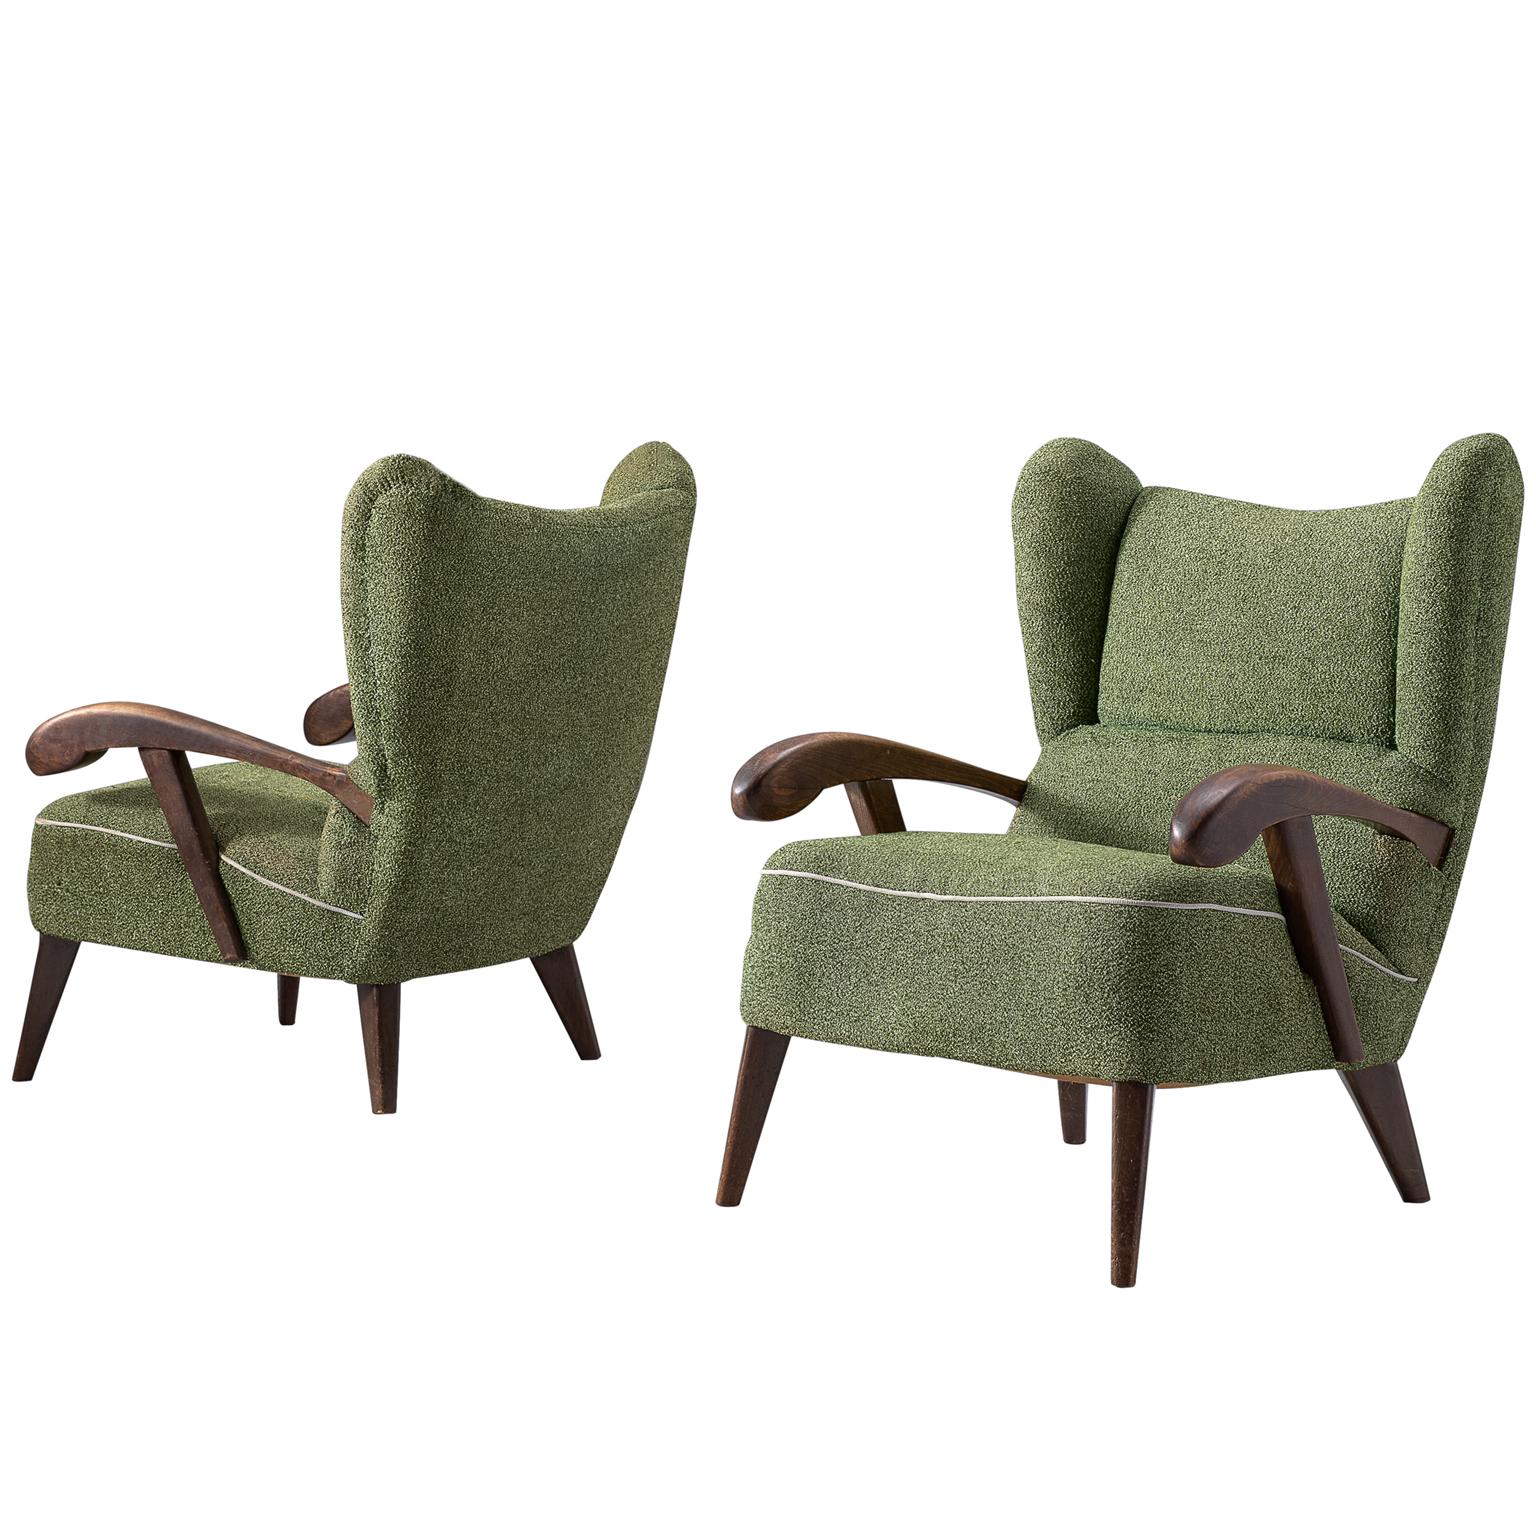 Pair of Lounge Chairs with Sculptural Wooden Frame